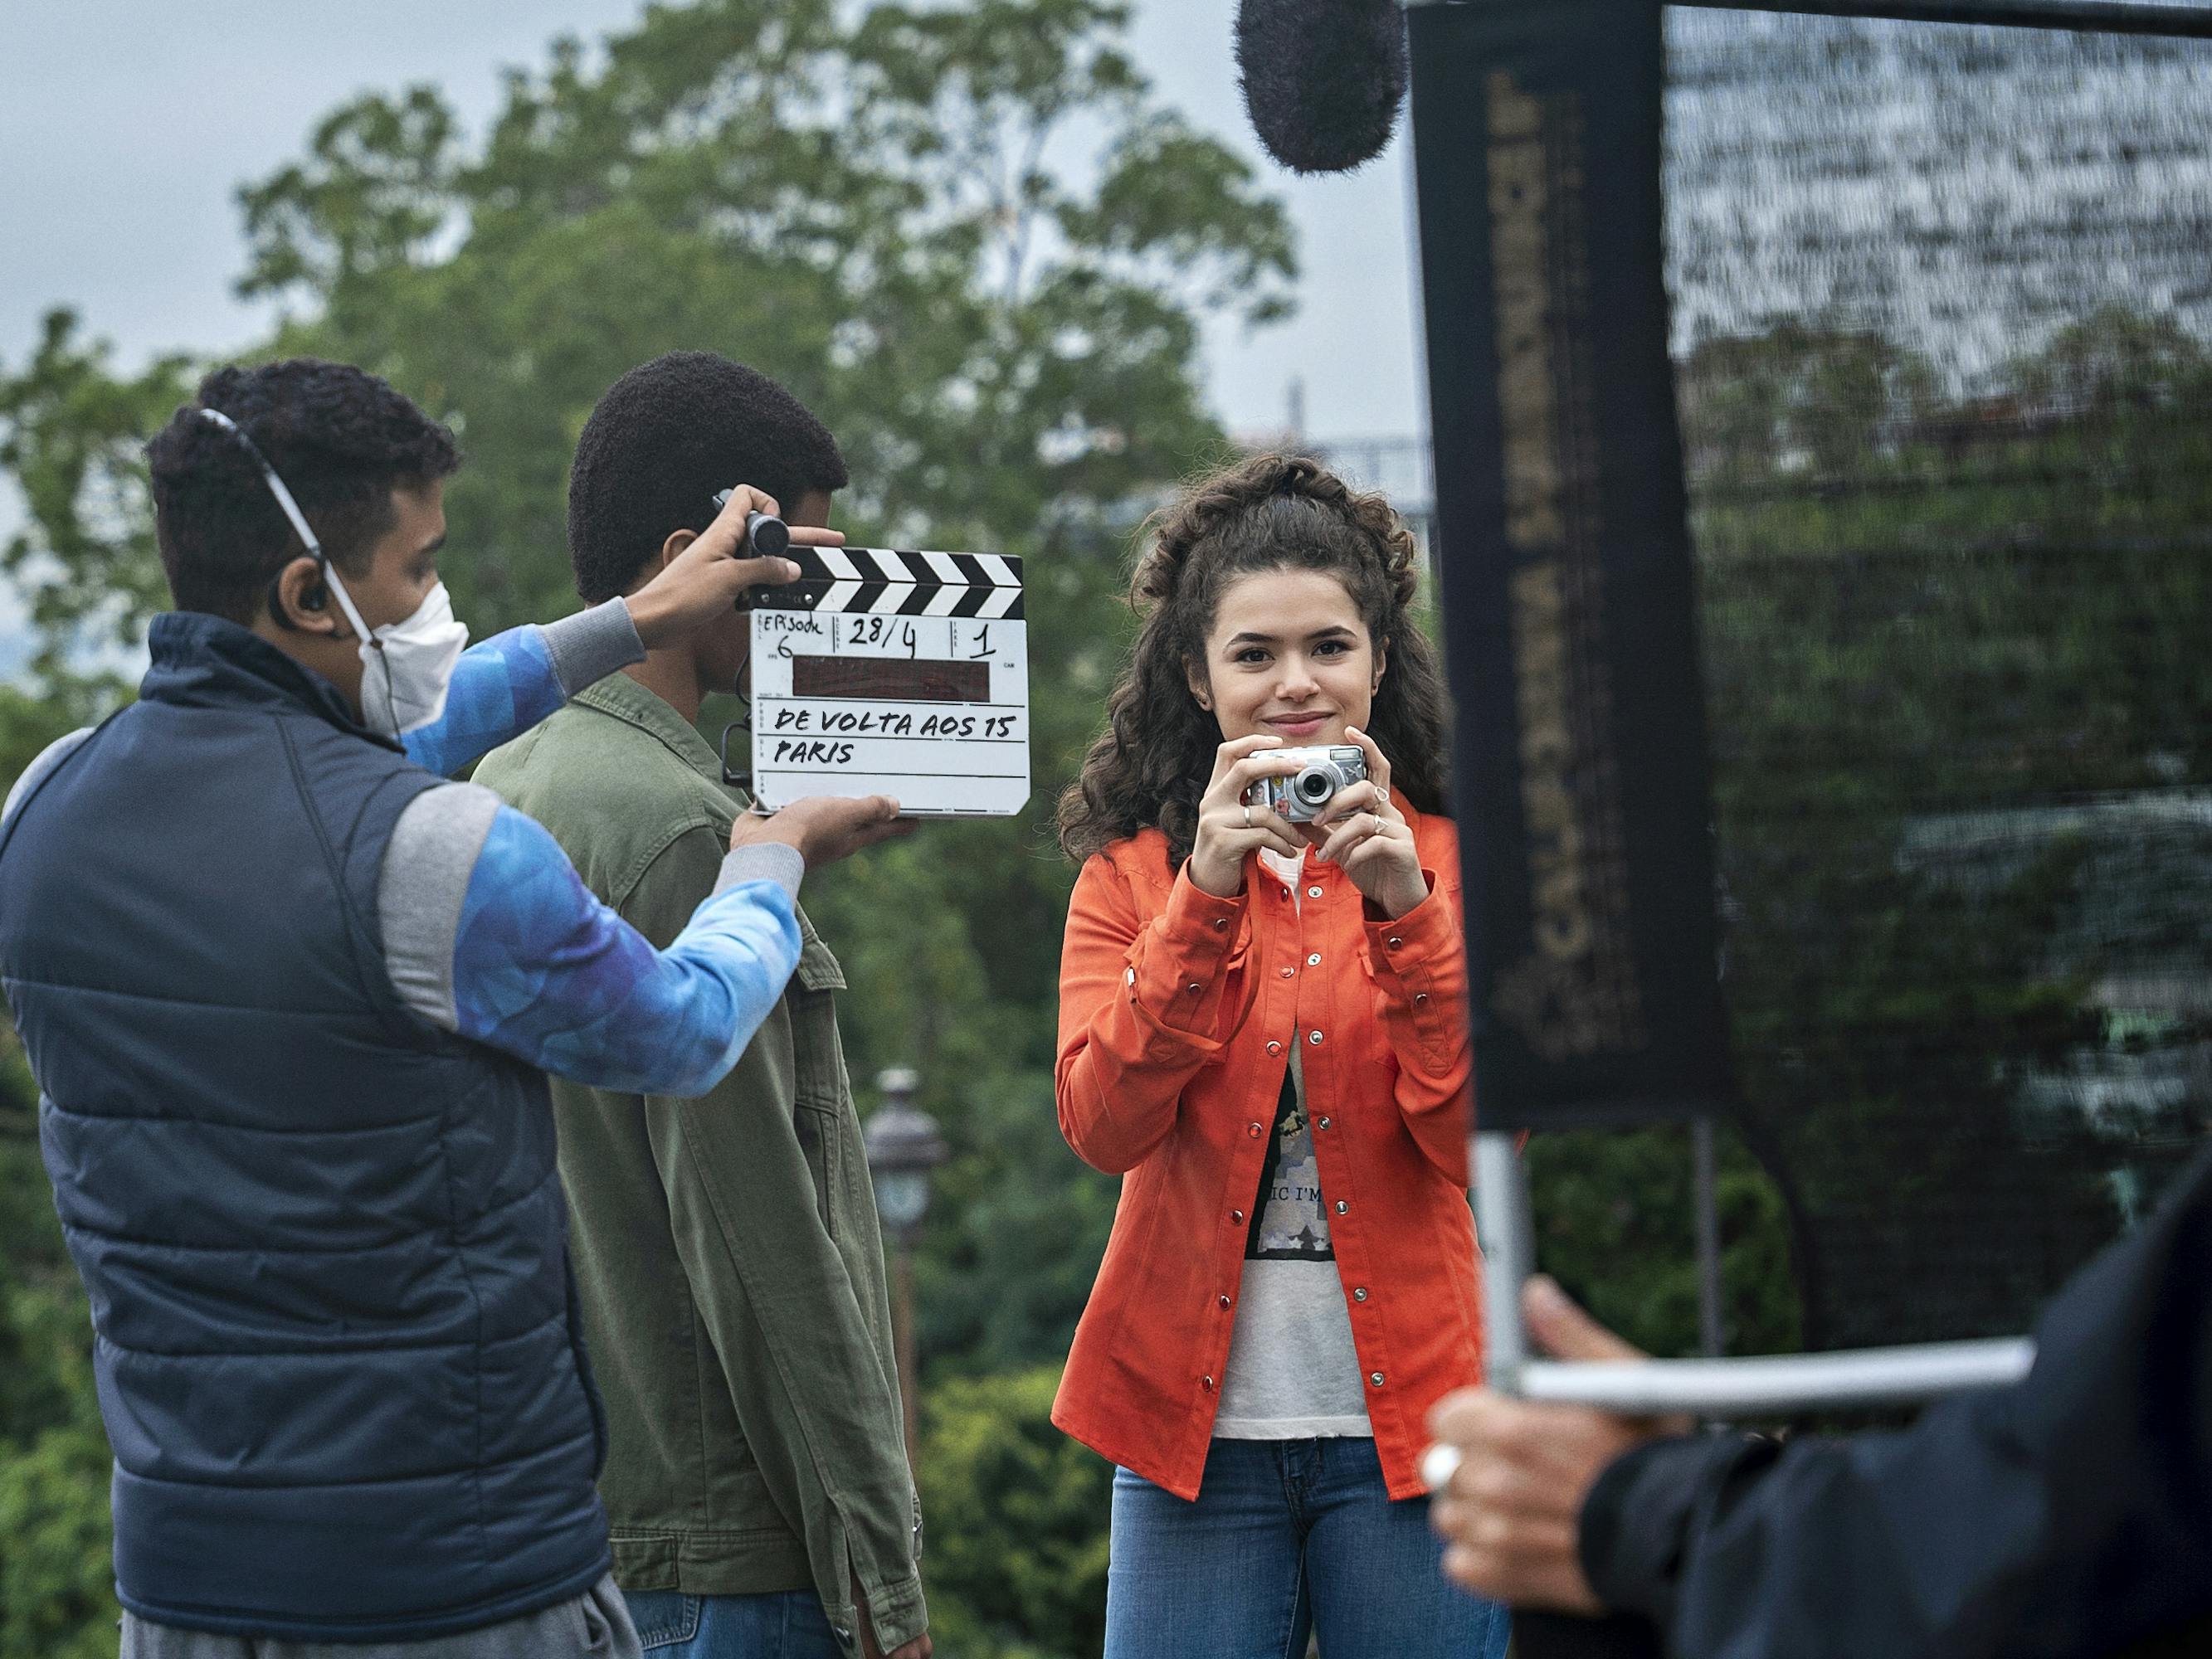 Maisa Silva wears jeans, a white t-shirt, and an orange jacket. She mingles with crew members, one of whom holds a clapperboard.